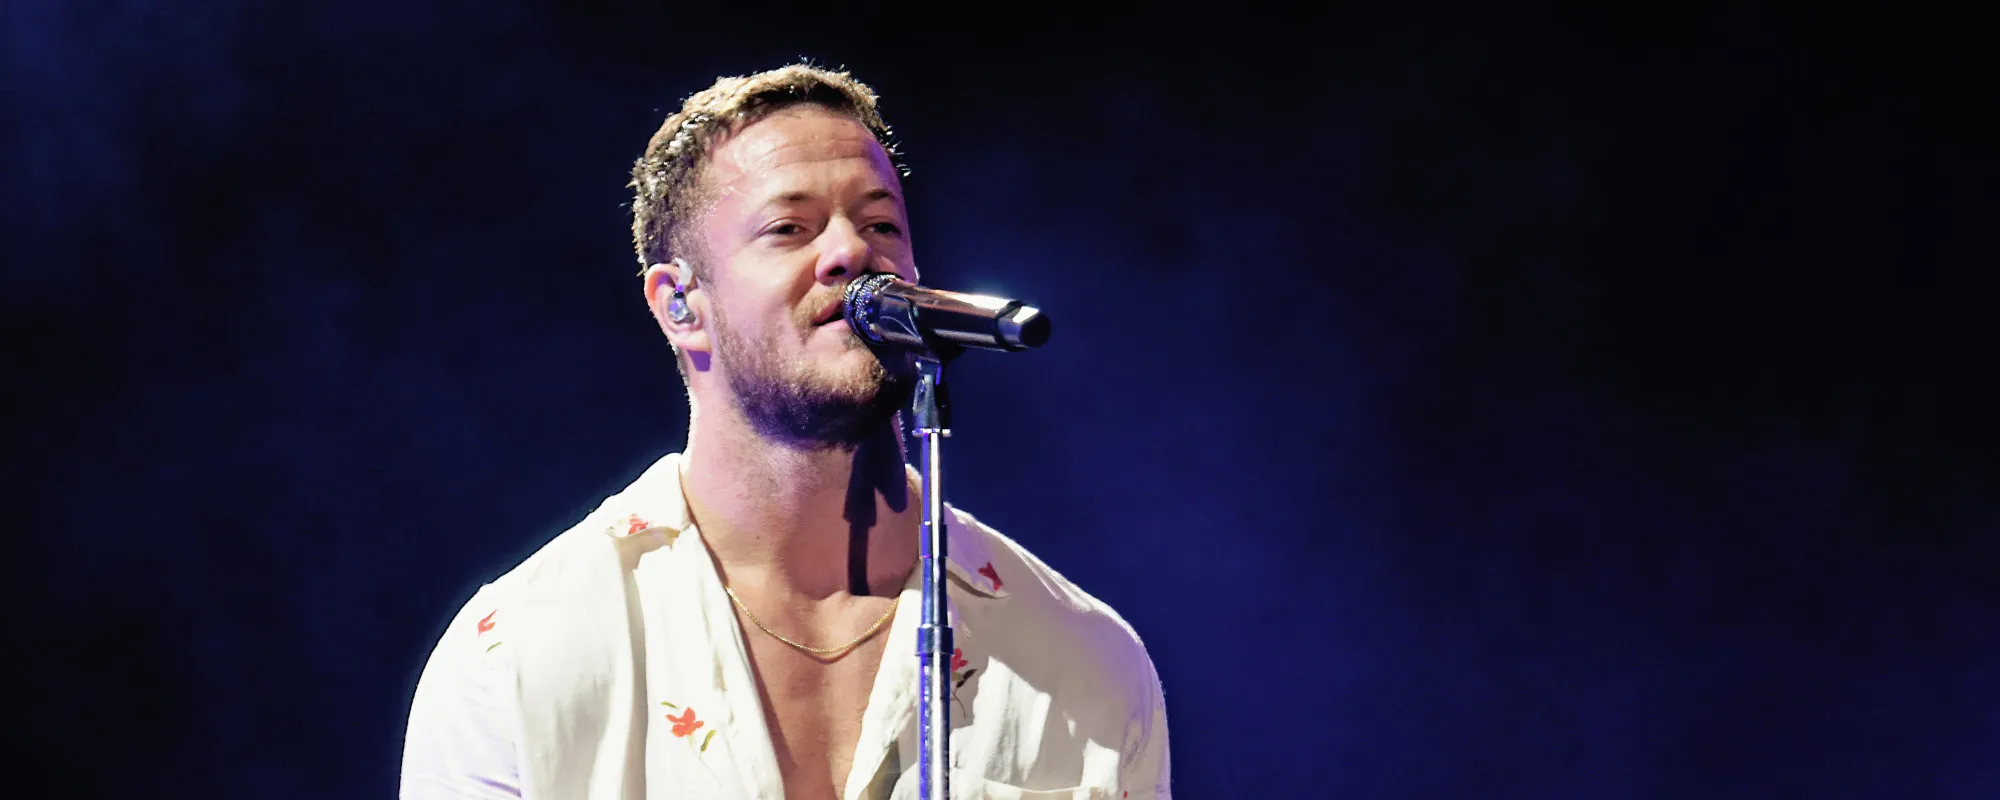 3 Songs You Didn’t Know Dan Reynolds Wrote for Imagine Dragons